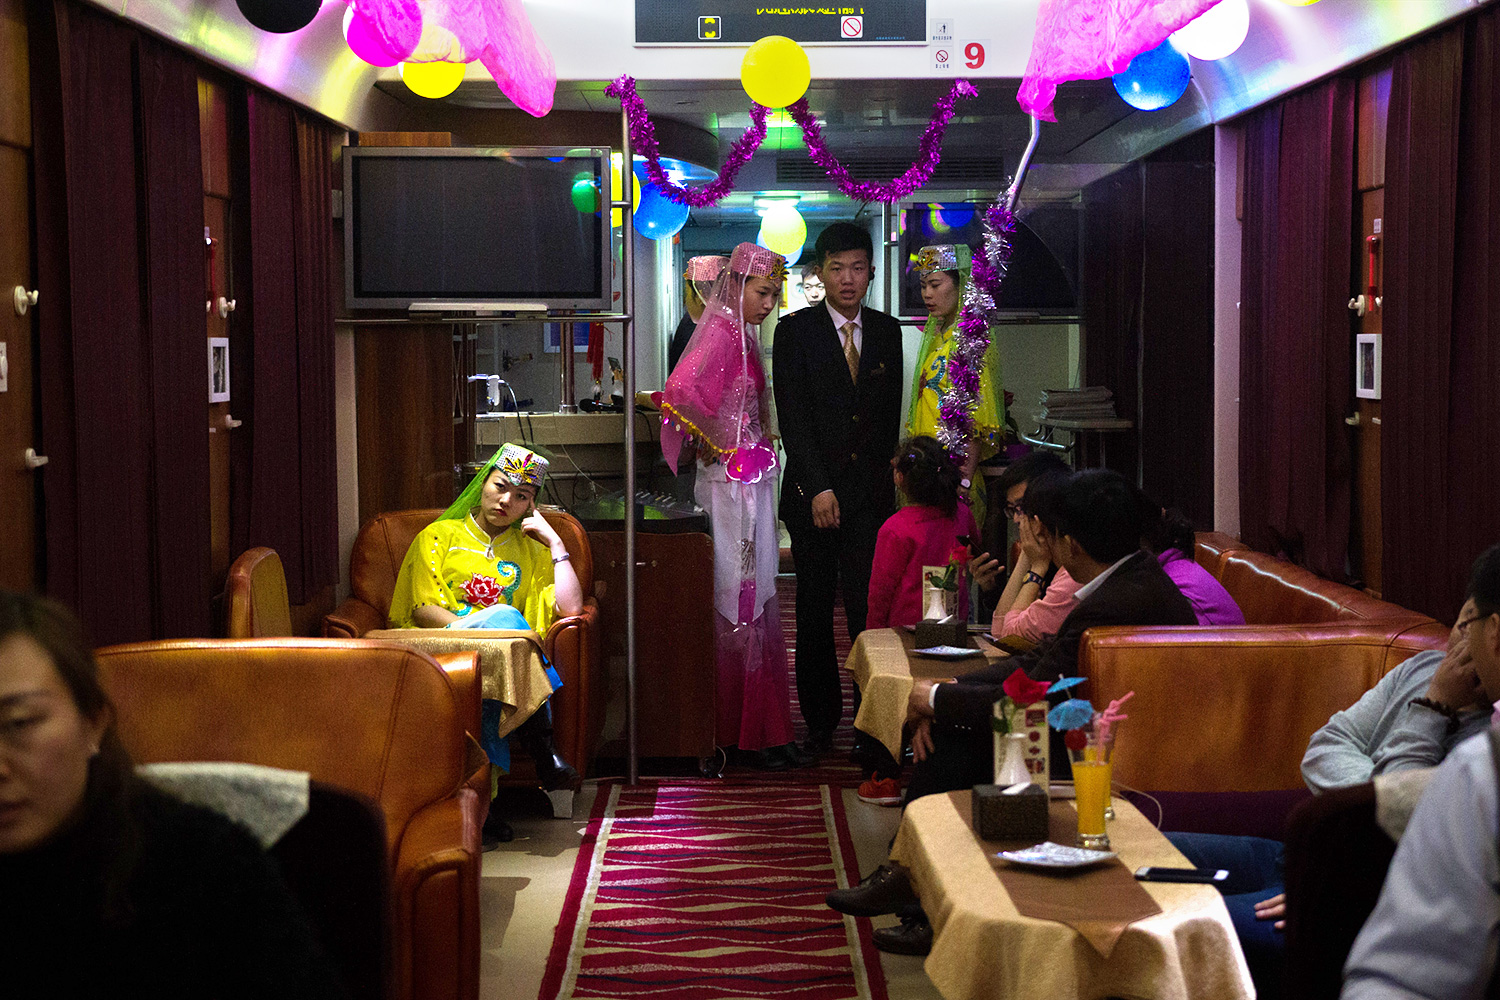 Railway staff dressed in traditional Hui-style outfits wait to perform a dance for the passengers in the dining car of a train bound for the autonomous region of Ningxia.